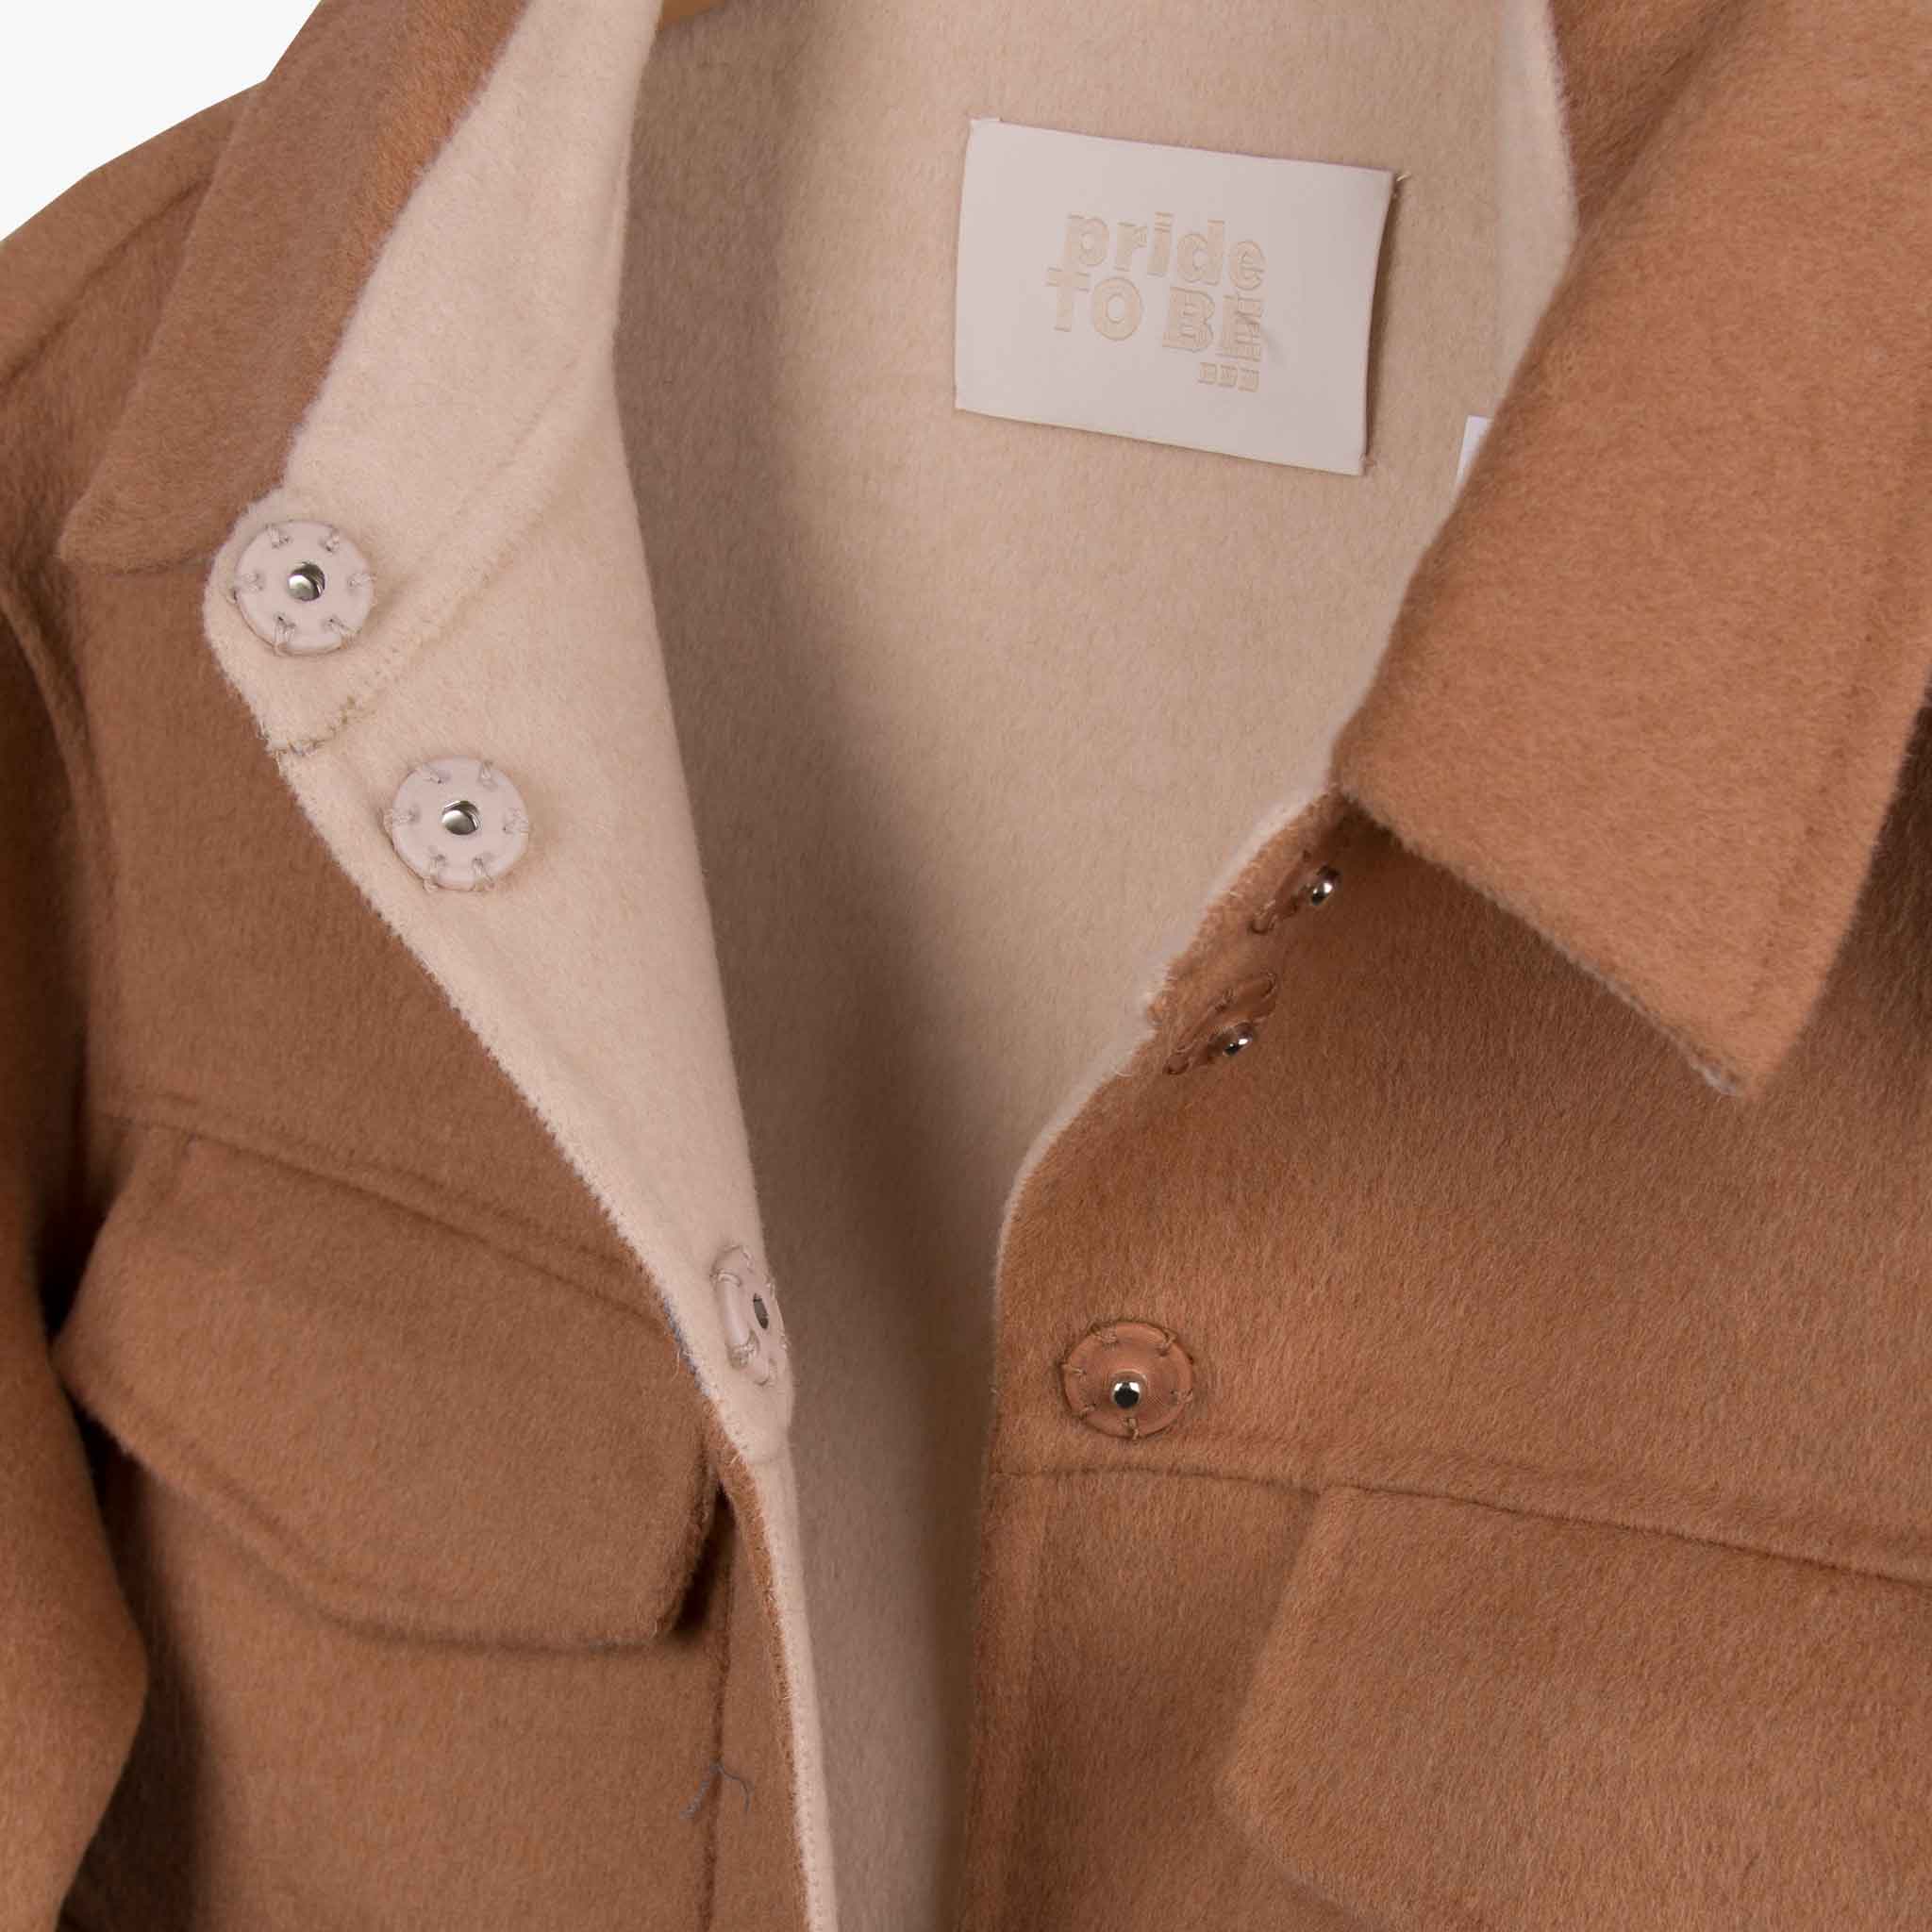 Pride to be Overjacket Wolle | camel